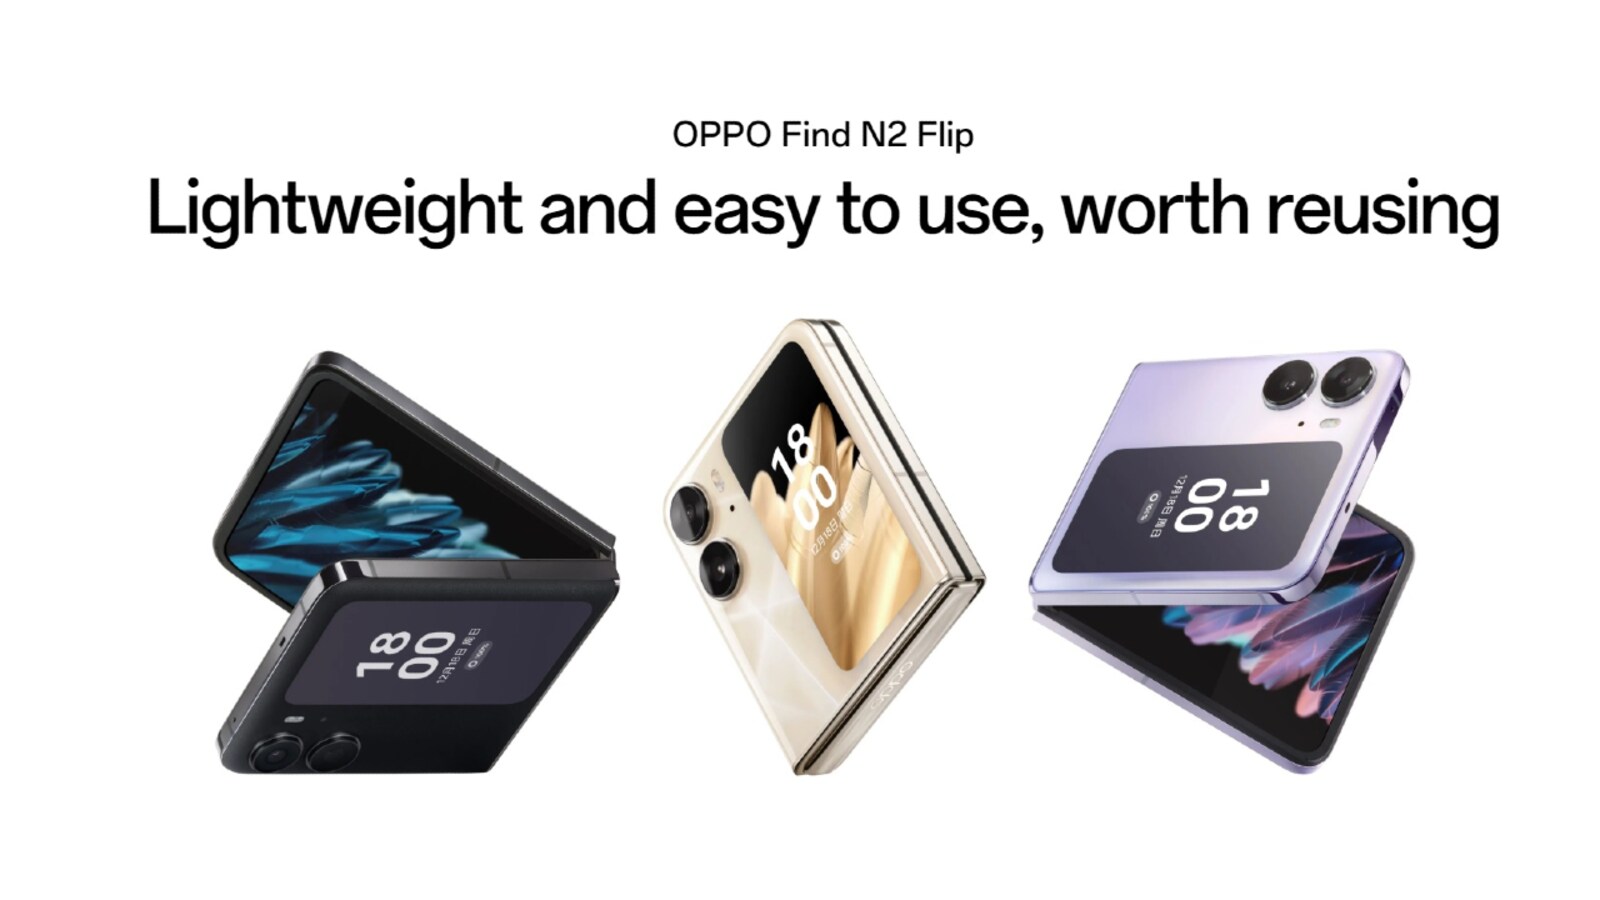 Oppo Find N2 Flip is the start of a better future